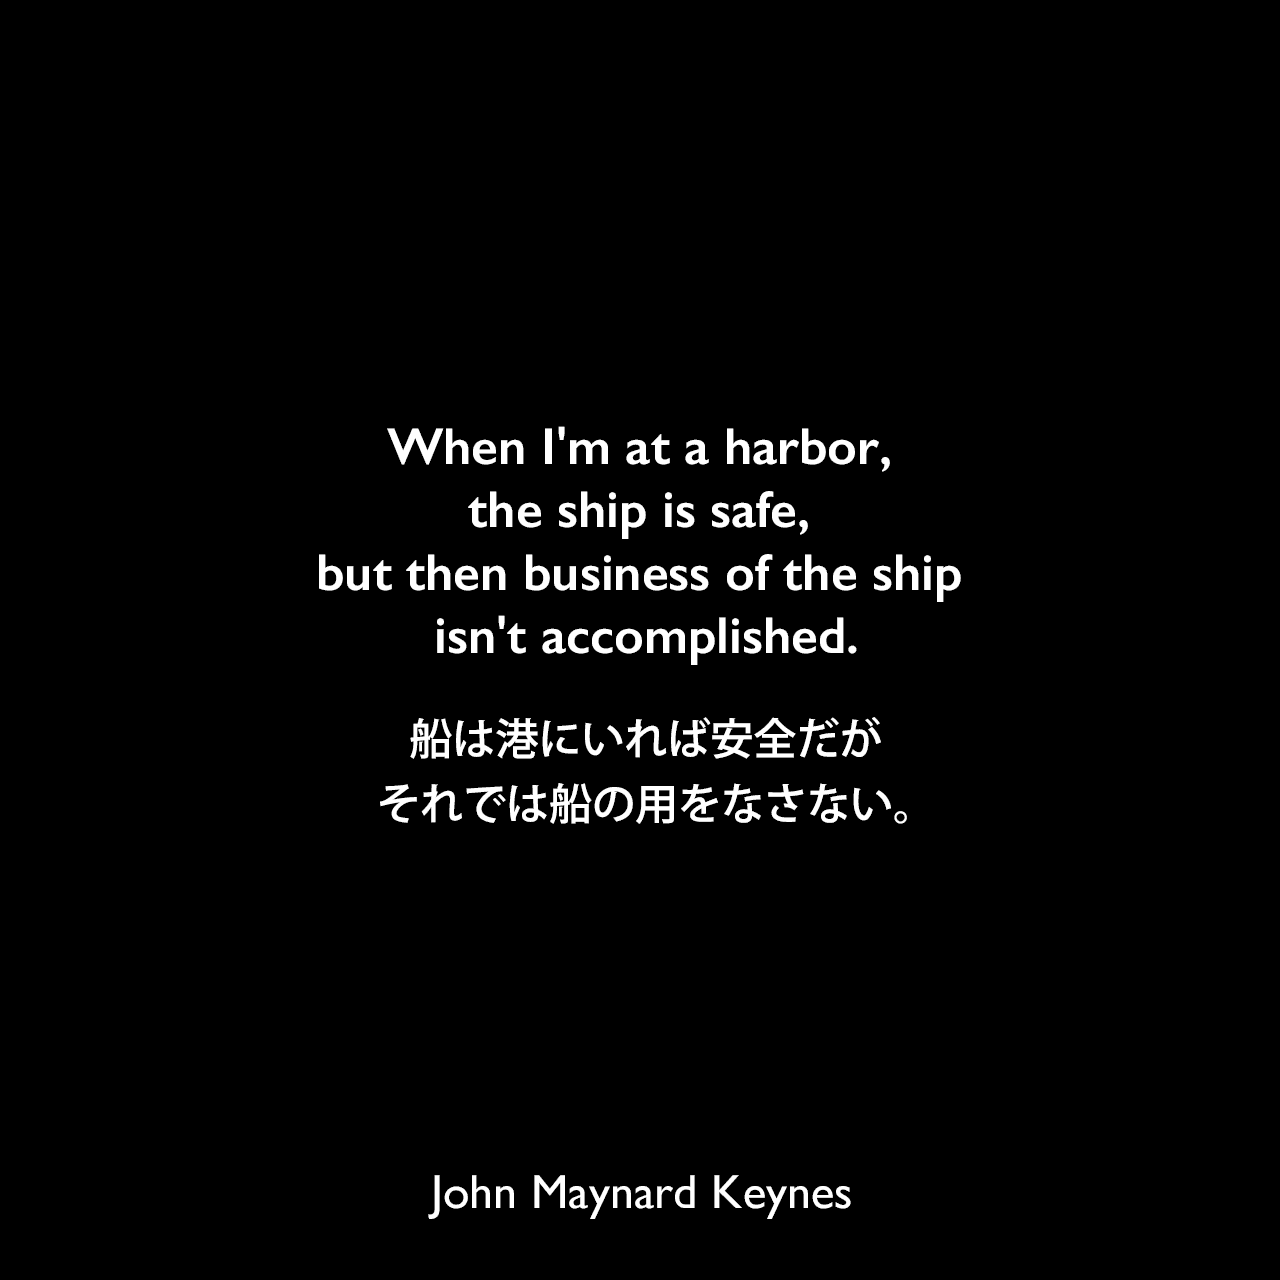 When I'm at a harbor, the ship is safe, but then business of the ship isn't accomplished.船は港にいれば安全だが、それでは船の用をなさない。John Maynard Keynes